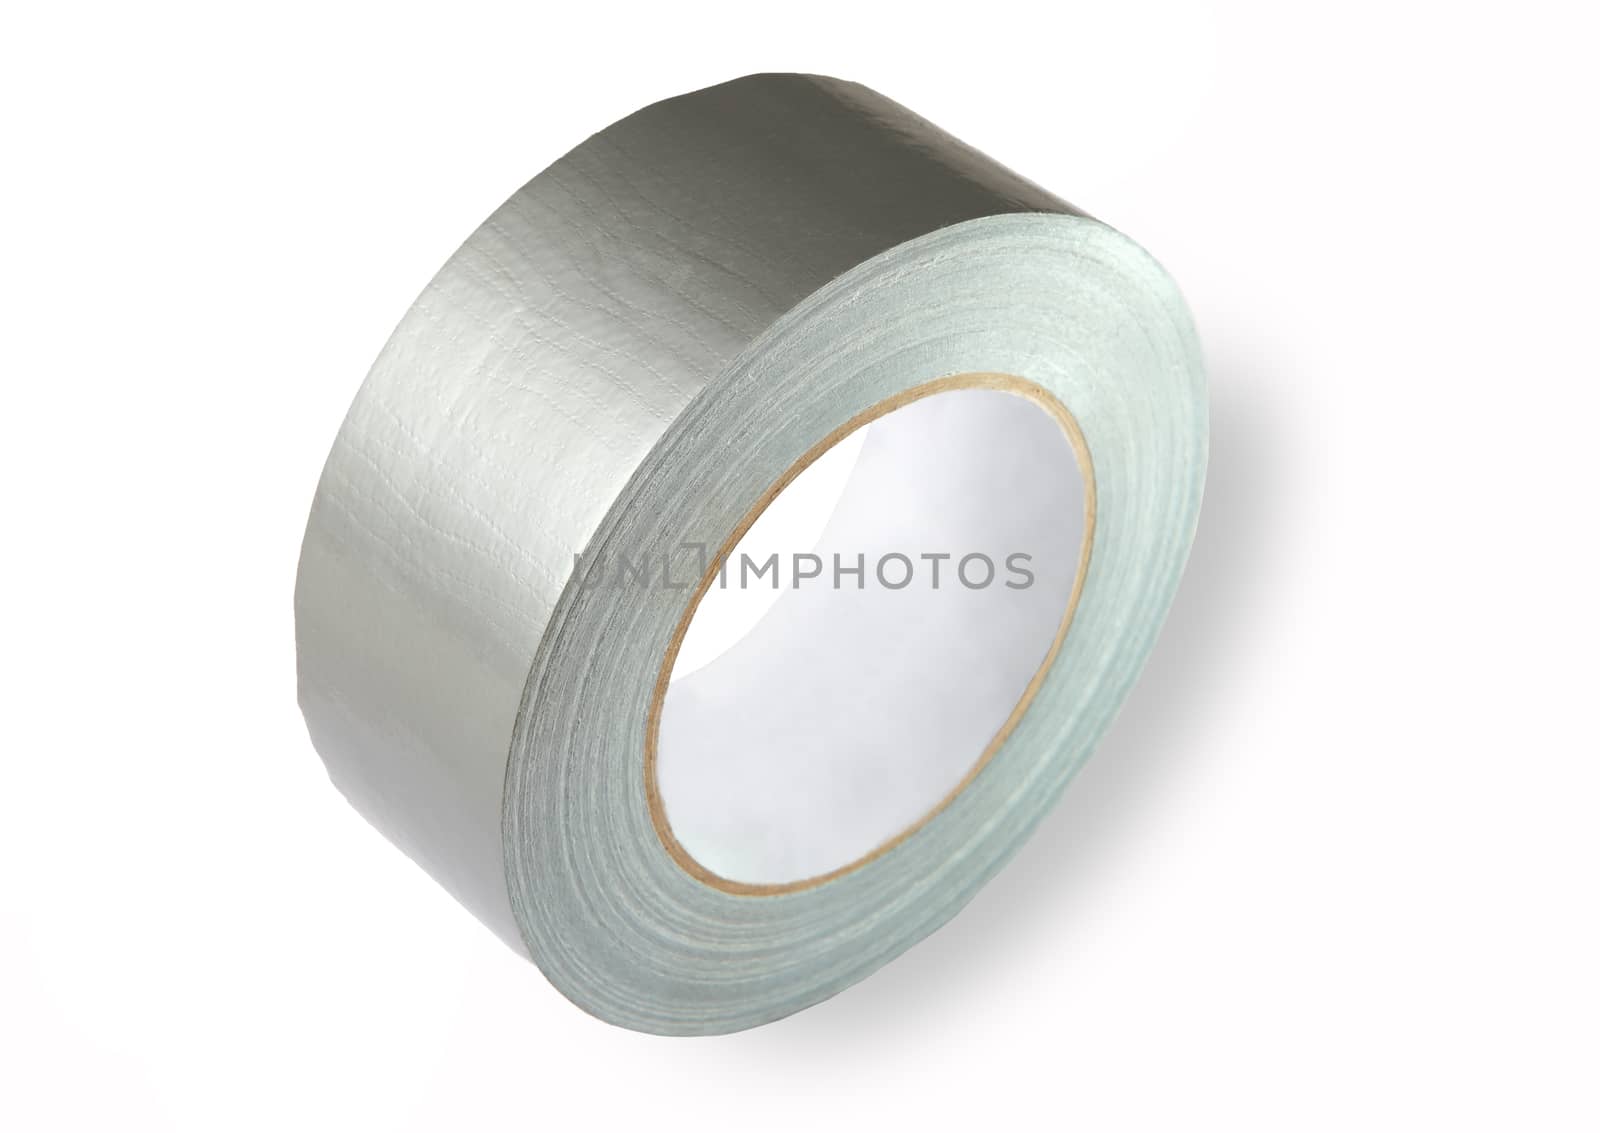 TPL tape consists of special glass fiber reinforced polyethylene basis with rubber adhesive coating. Waterproof reinforced adhesive tpl tape (duct), gray color with a metallic sheen, isolated image on white background.